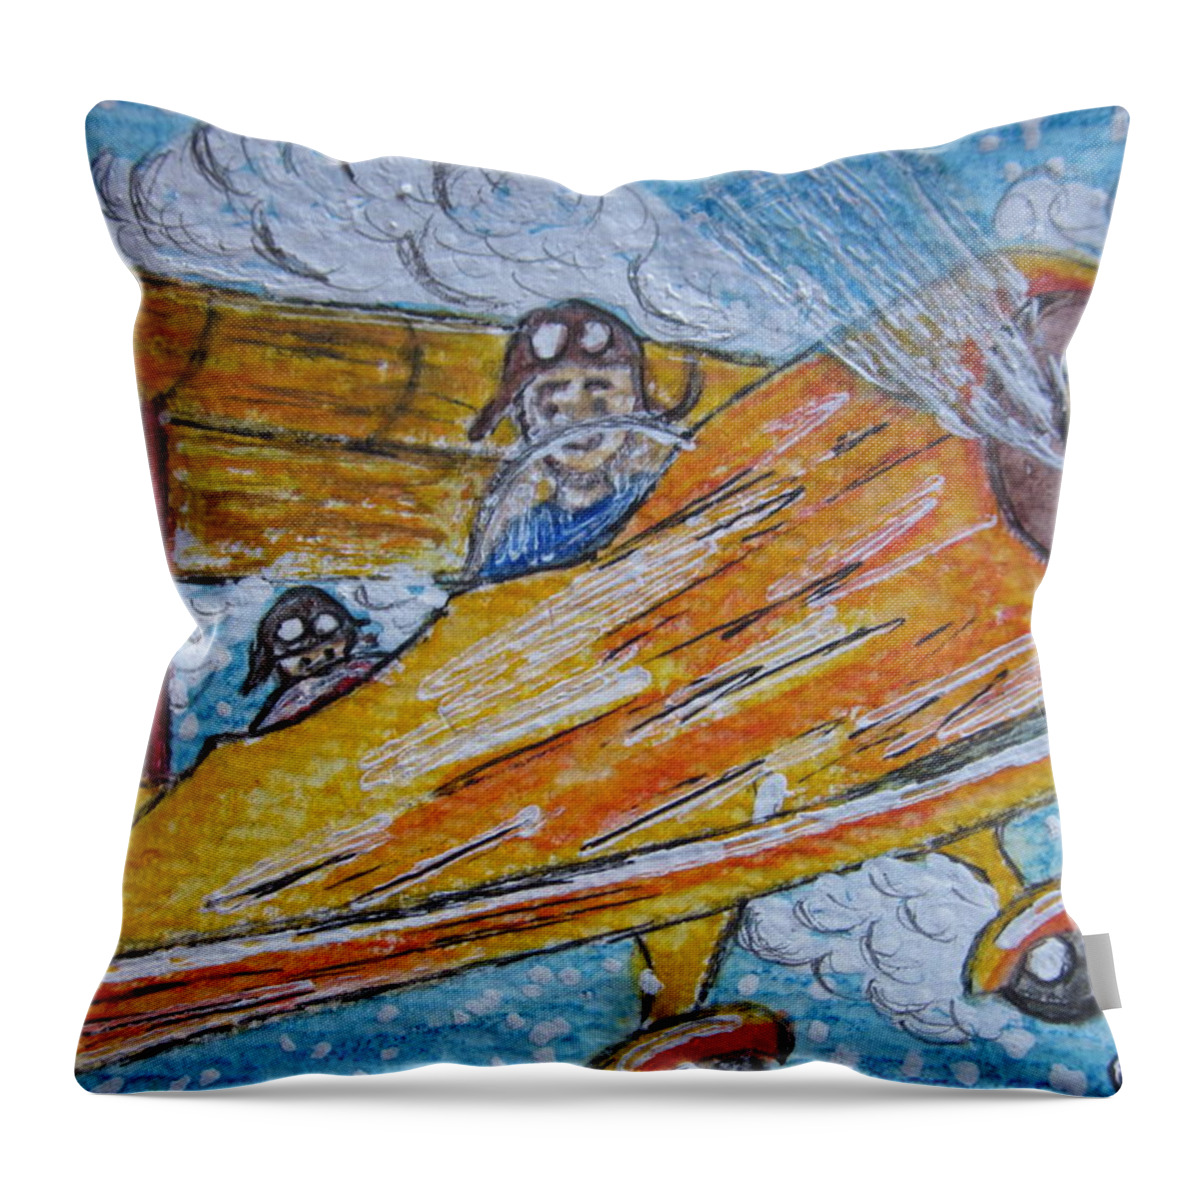 Cartoon Throw Pillow featuring the painting Cartoon Airplane by Kathy Marrs Chandler